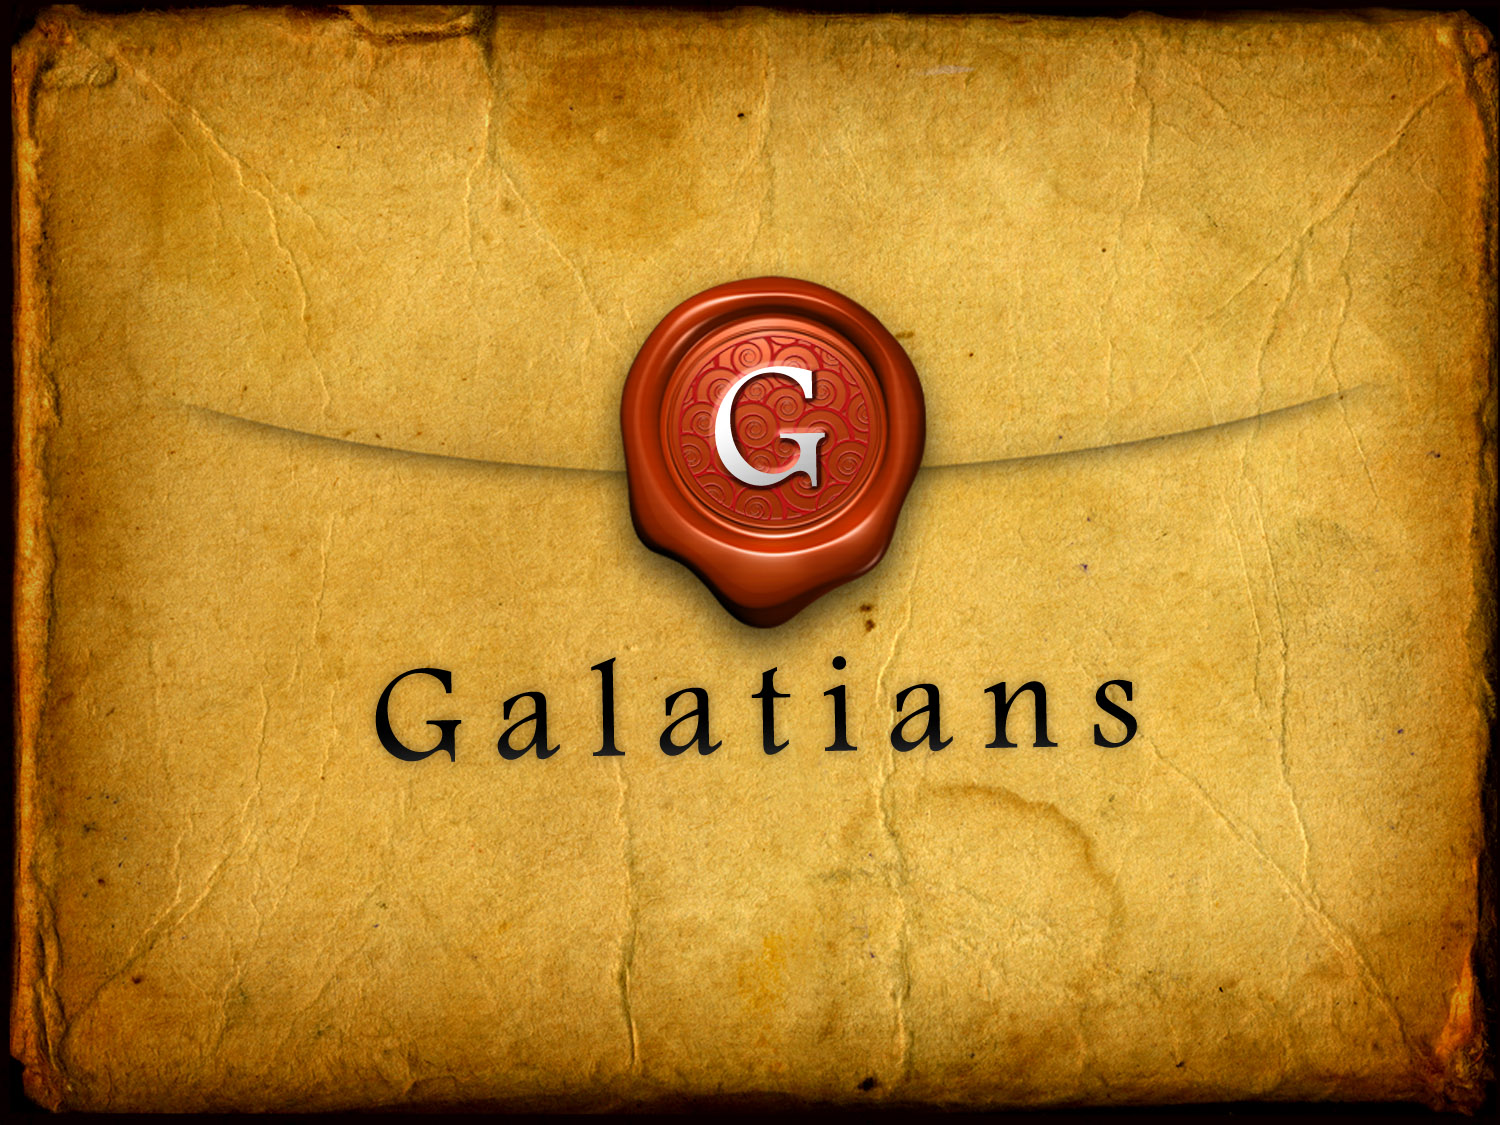 The Book of Galatians 6:11-18